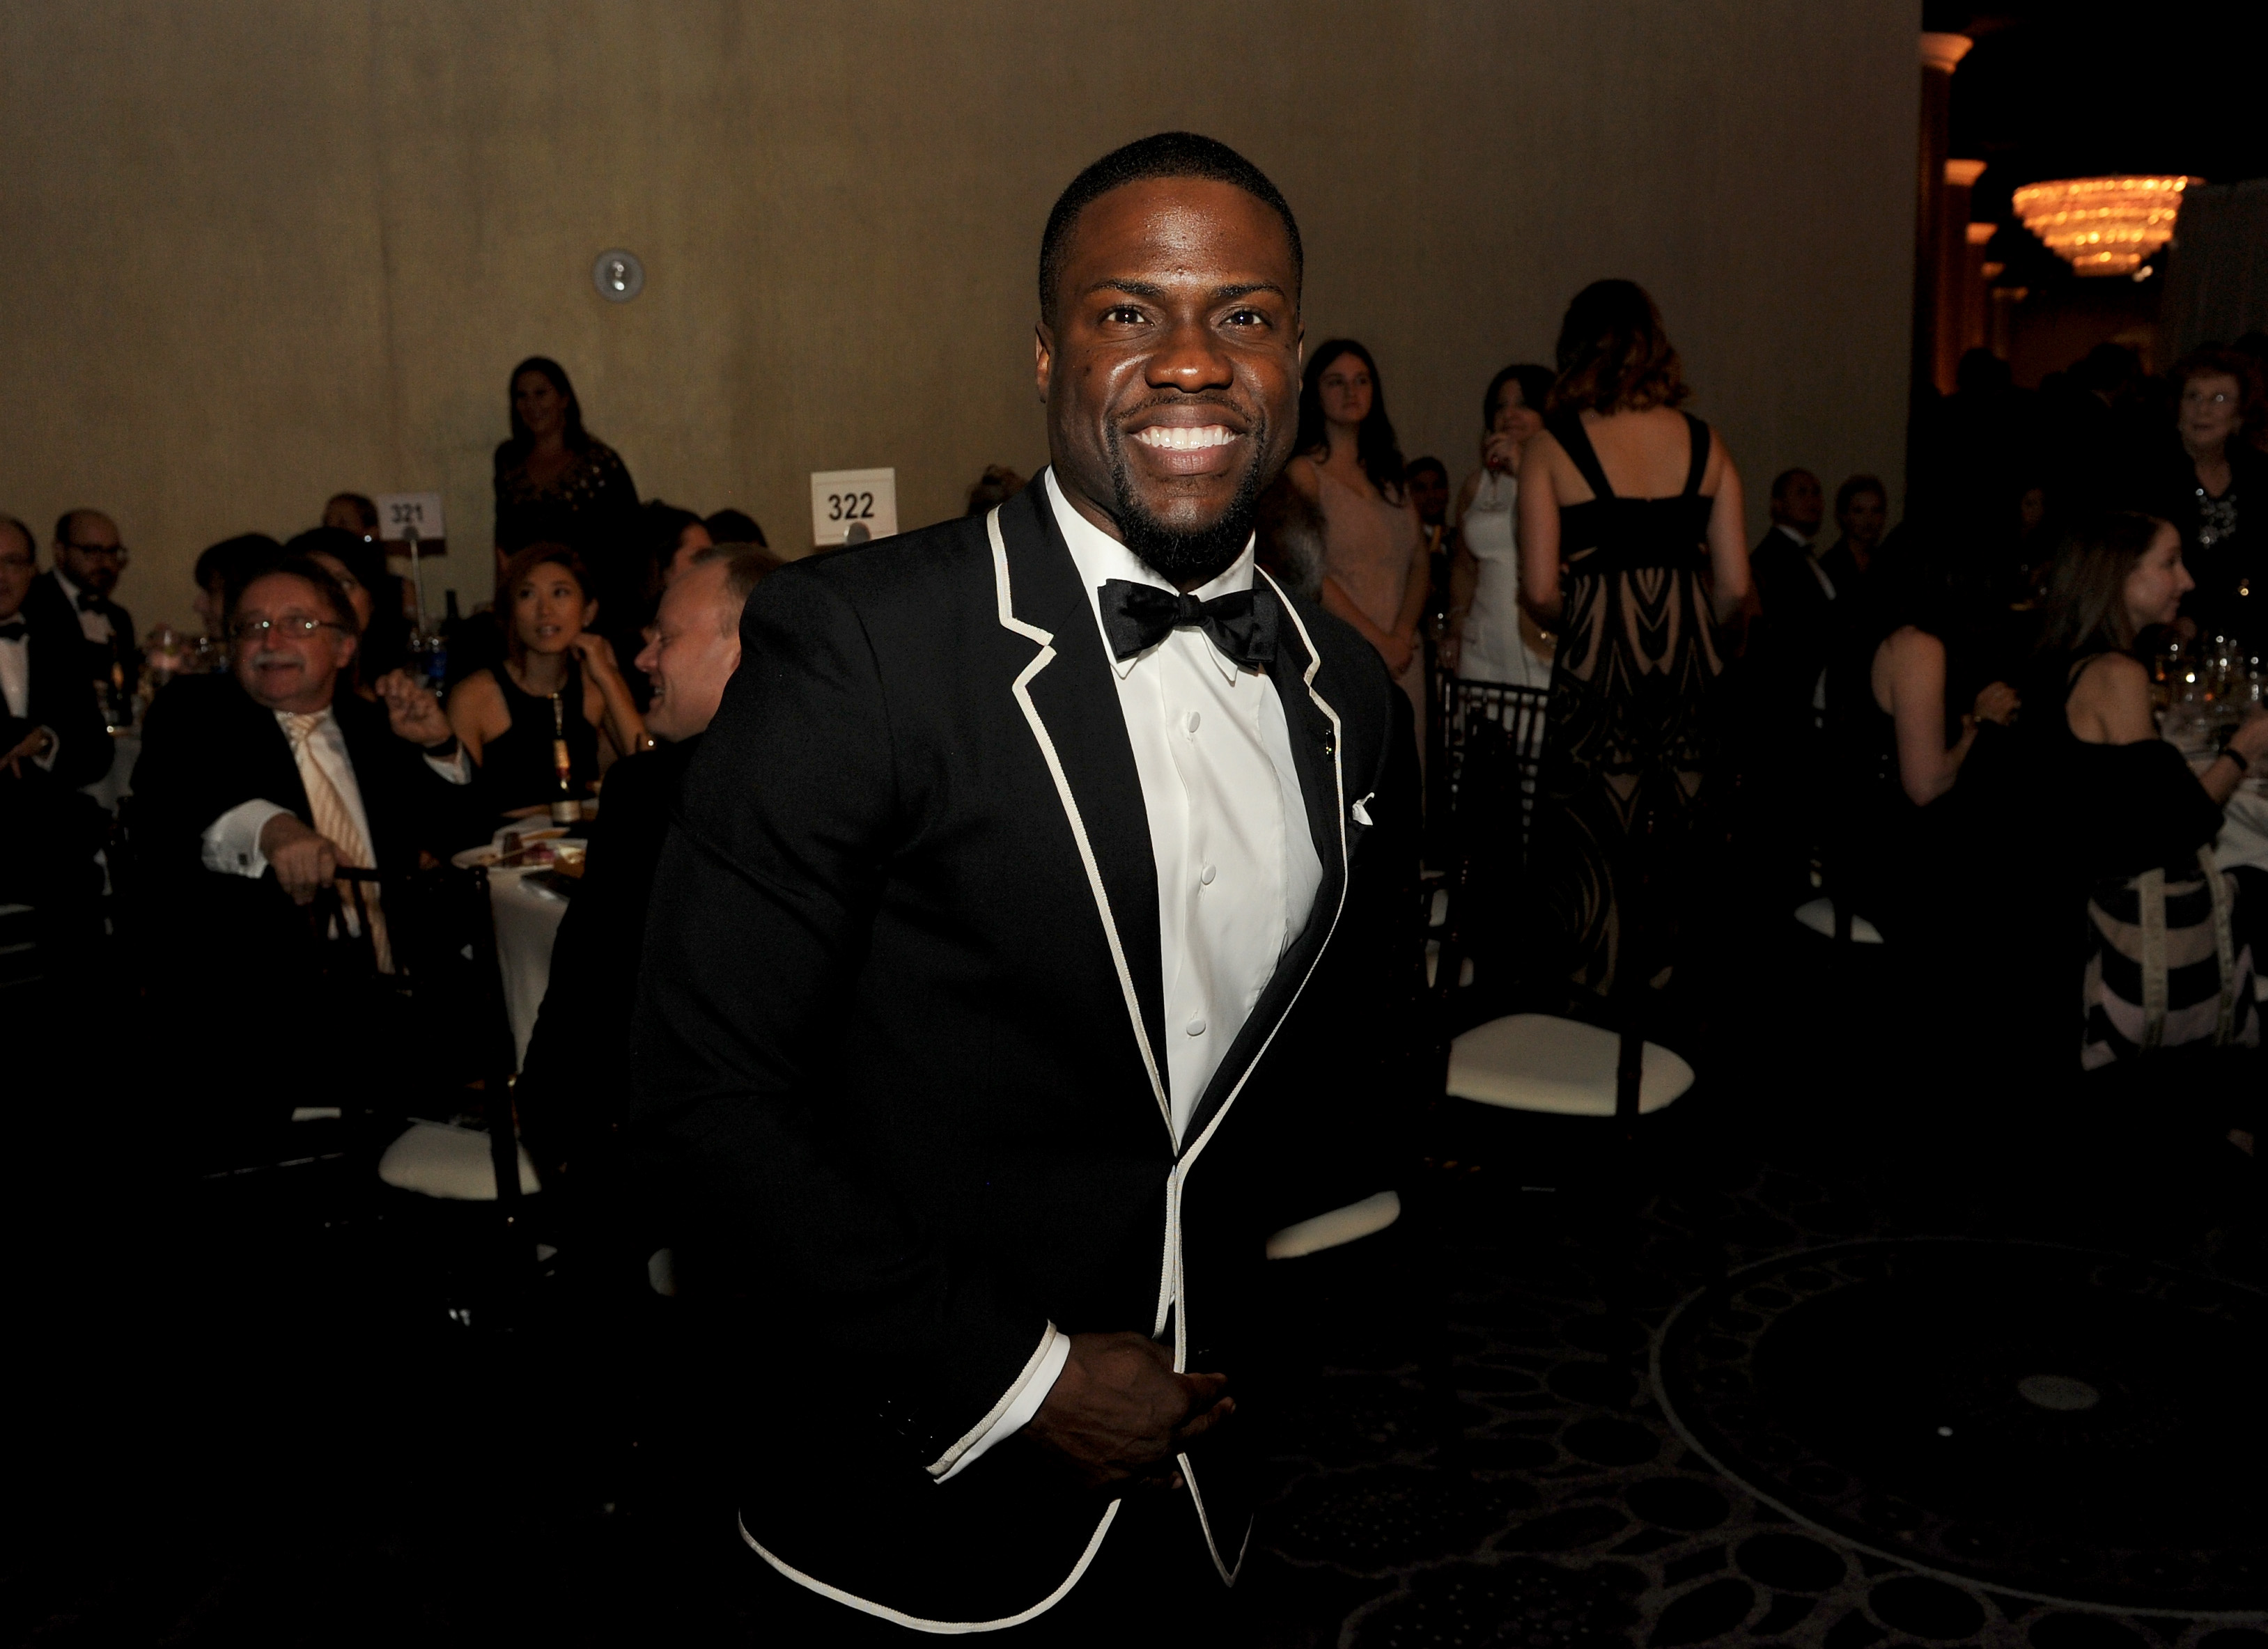 BEVERLY HILLS, CA - JANUARY 11:  Actor Kevin Hart attends the 72nd Annual Golden Globe Awards cocktail party at The Beverly Hilton Hotel on January 11, 2015 in Beverly Hills, California.  (Photo by Kevin Winter/Getty Images) (Kevin Winter-Getty Images)